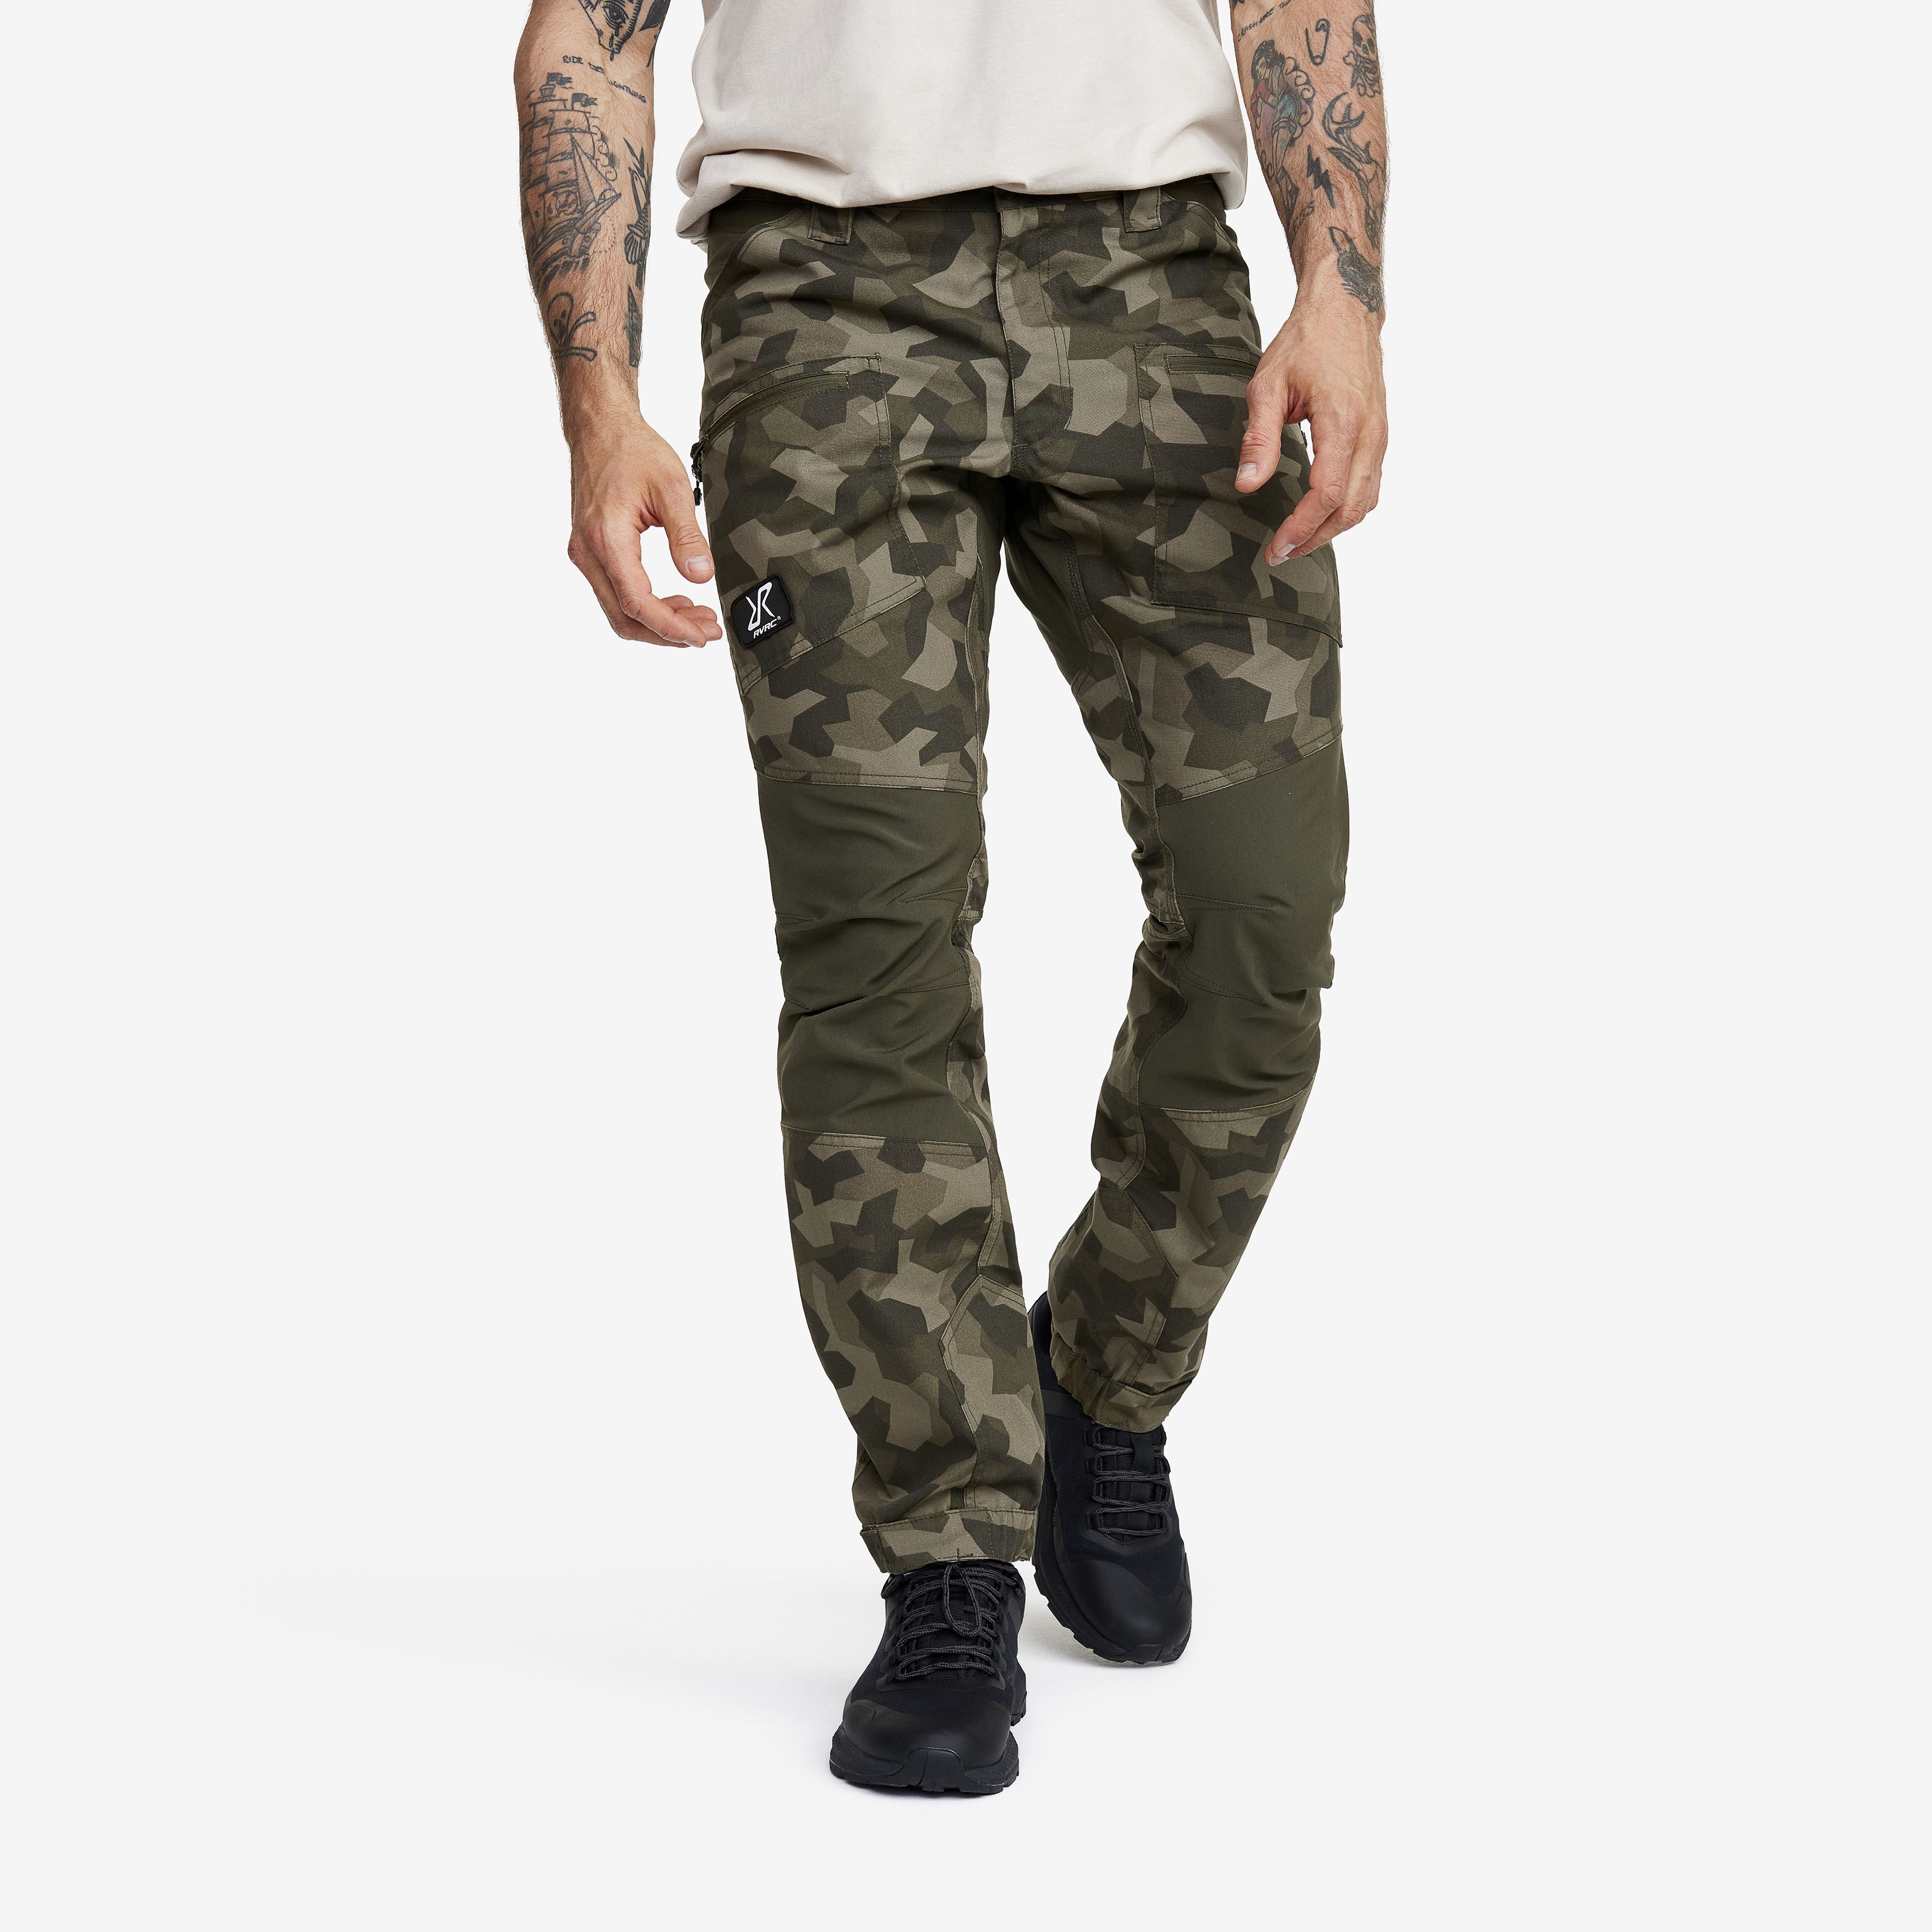 Nordwand Pro Pants Forest Camo Miehet